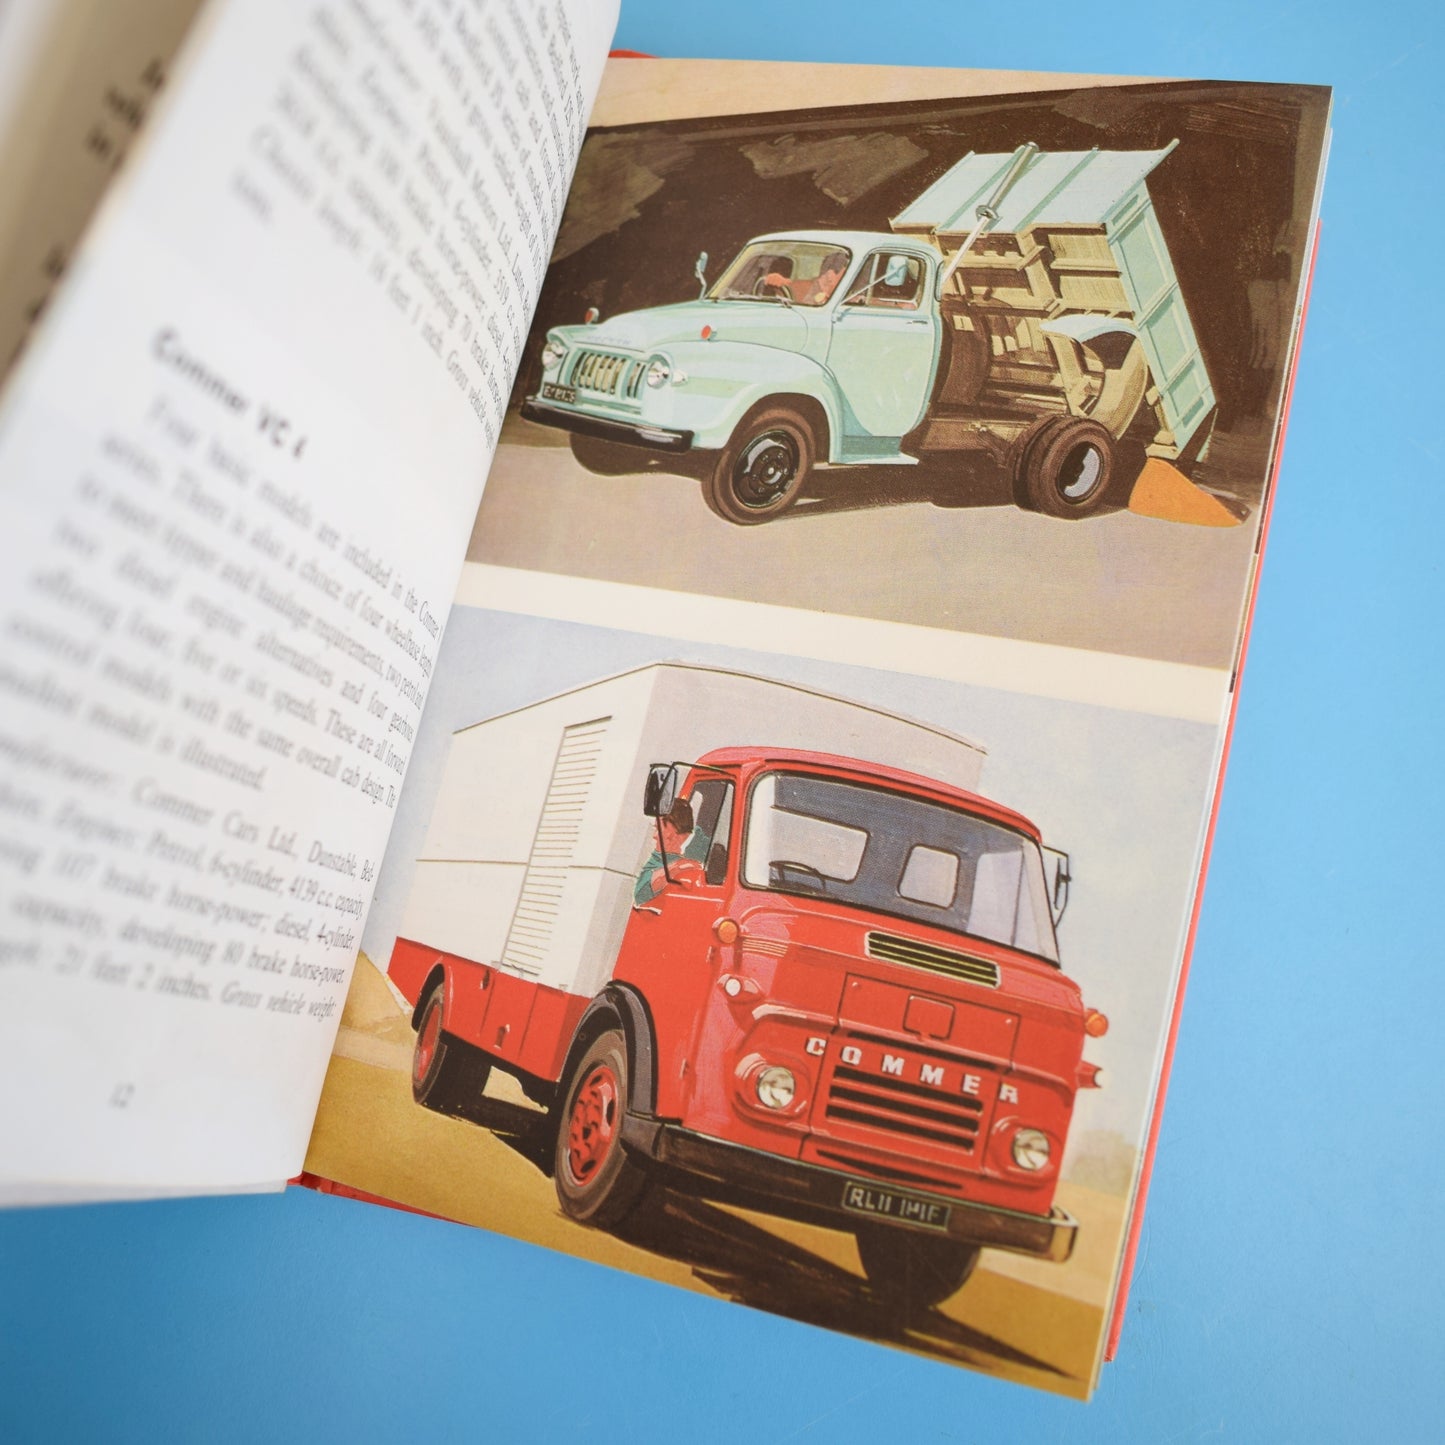 Vintage Ladybird Book - Commercial Vehicles